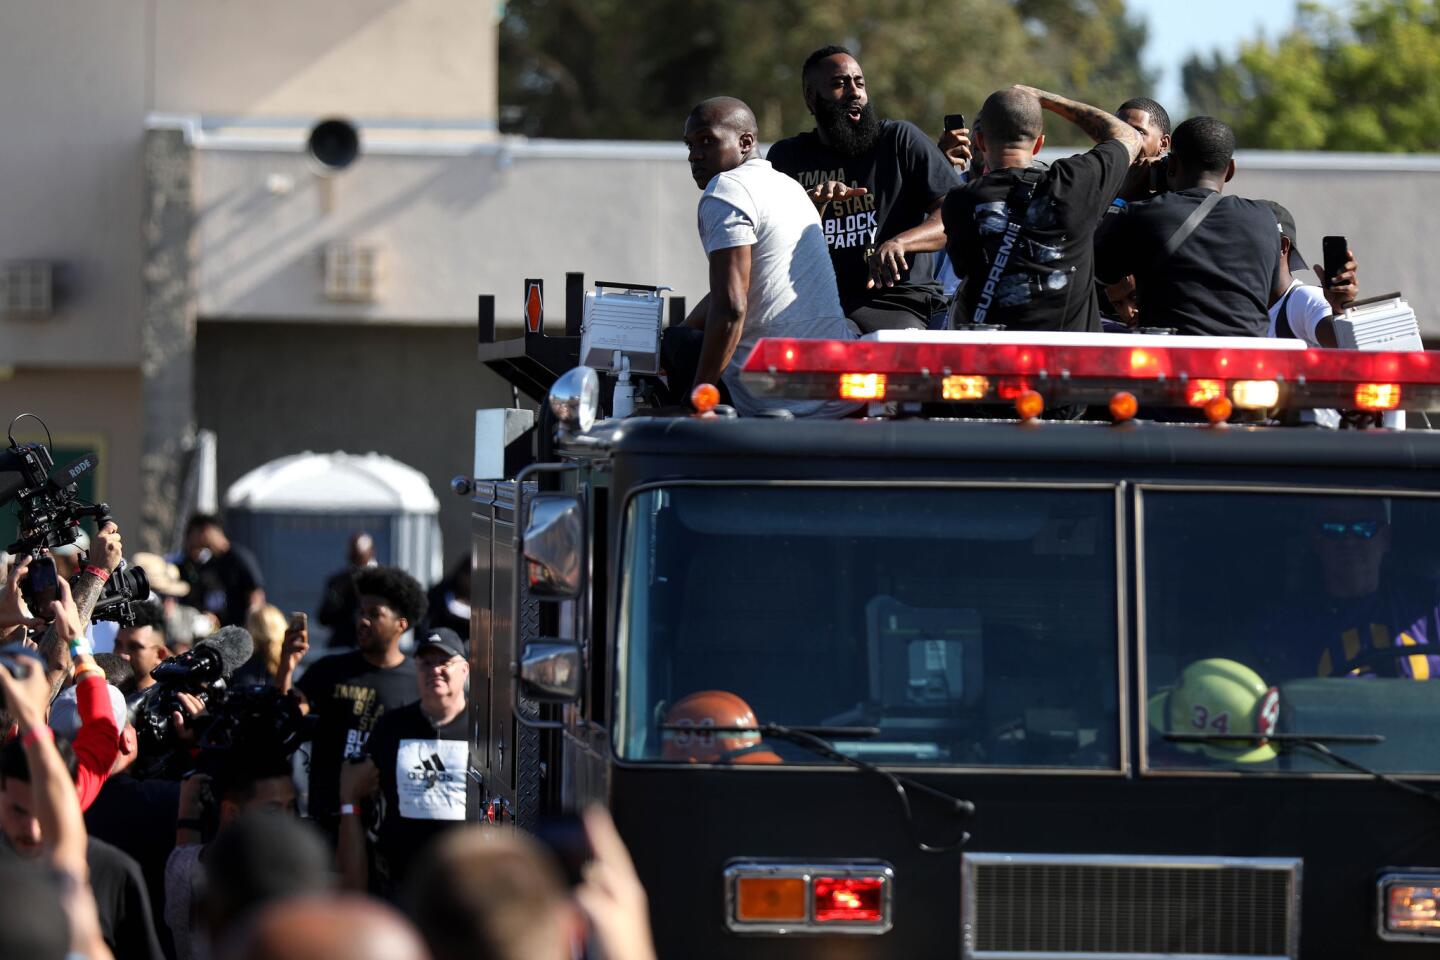 NBA star James Harden arrives on a firetruck at the "Imma be a star" block party on Sunday at Audobon Middle School, where he helped dedicate new basketball courts on the campus.